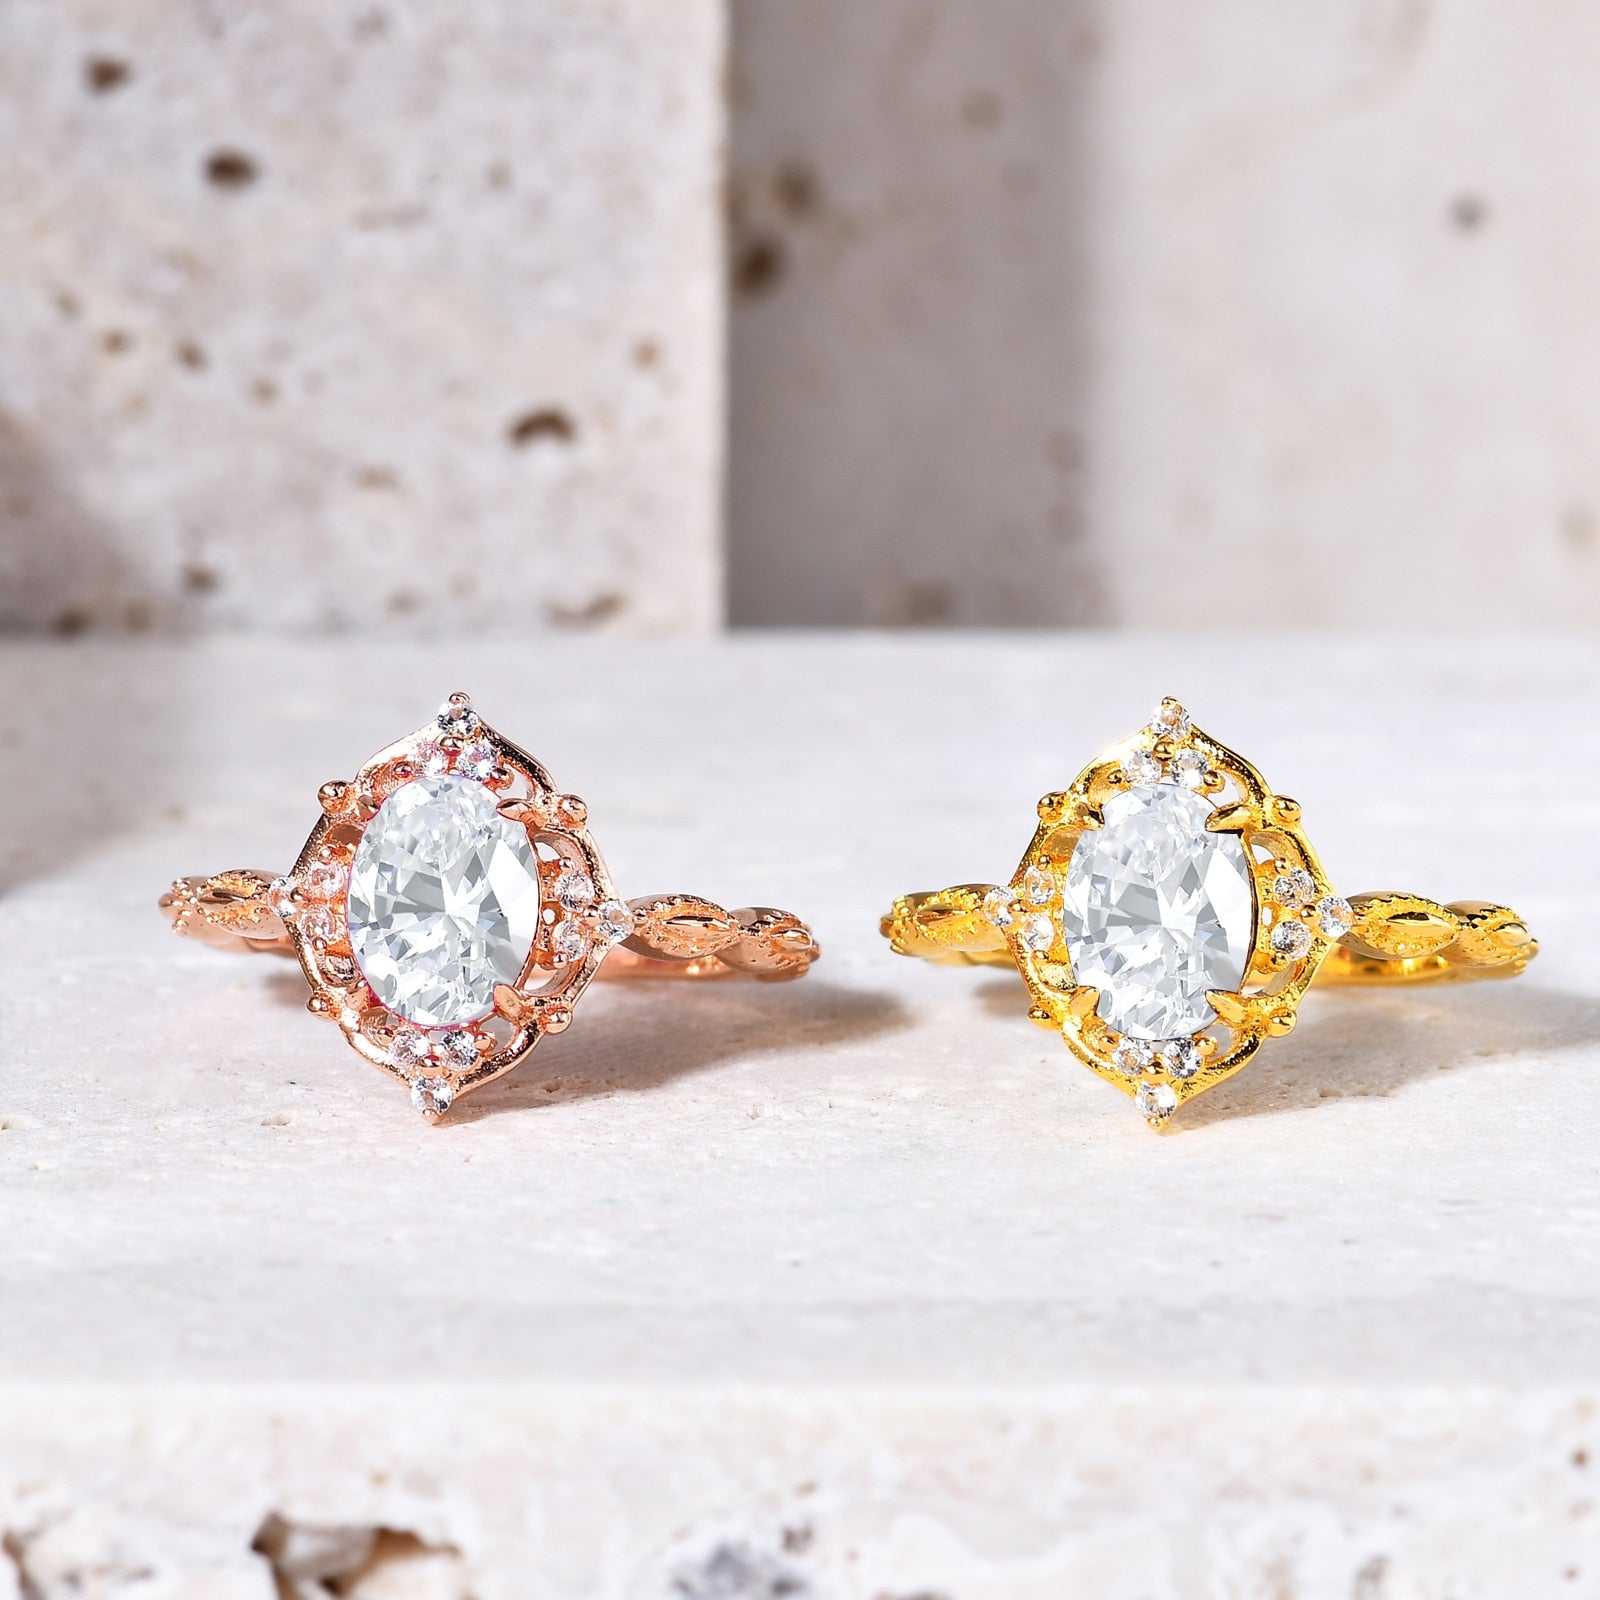 Two solid rose gold and yellow gold vintage style halo engagement rings set with an oval cut moissanites.